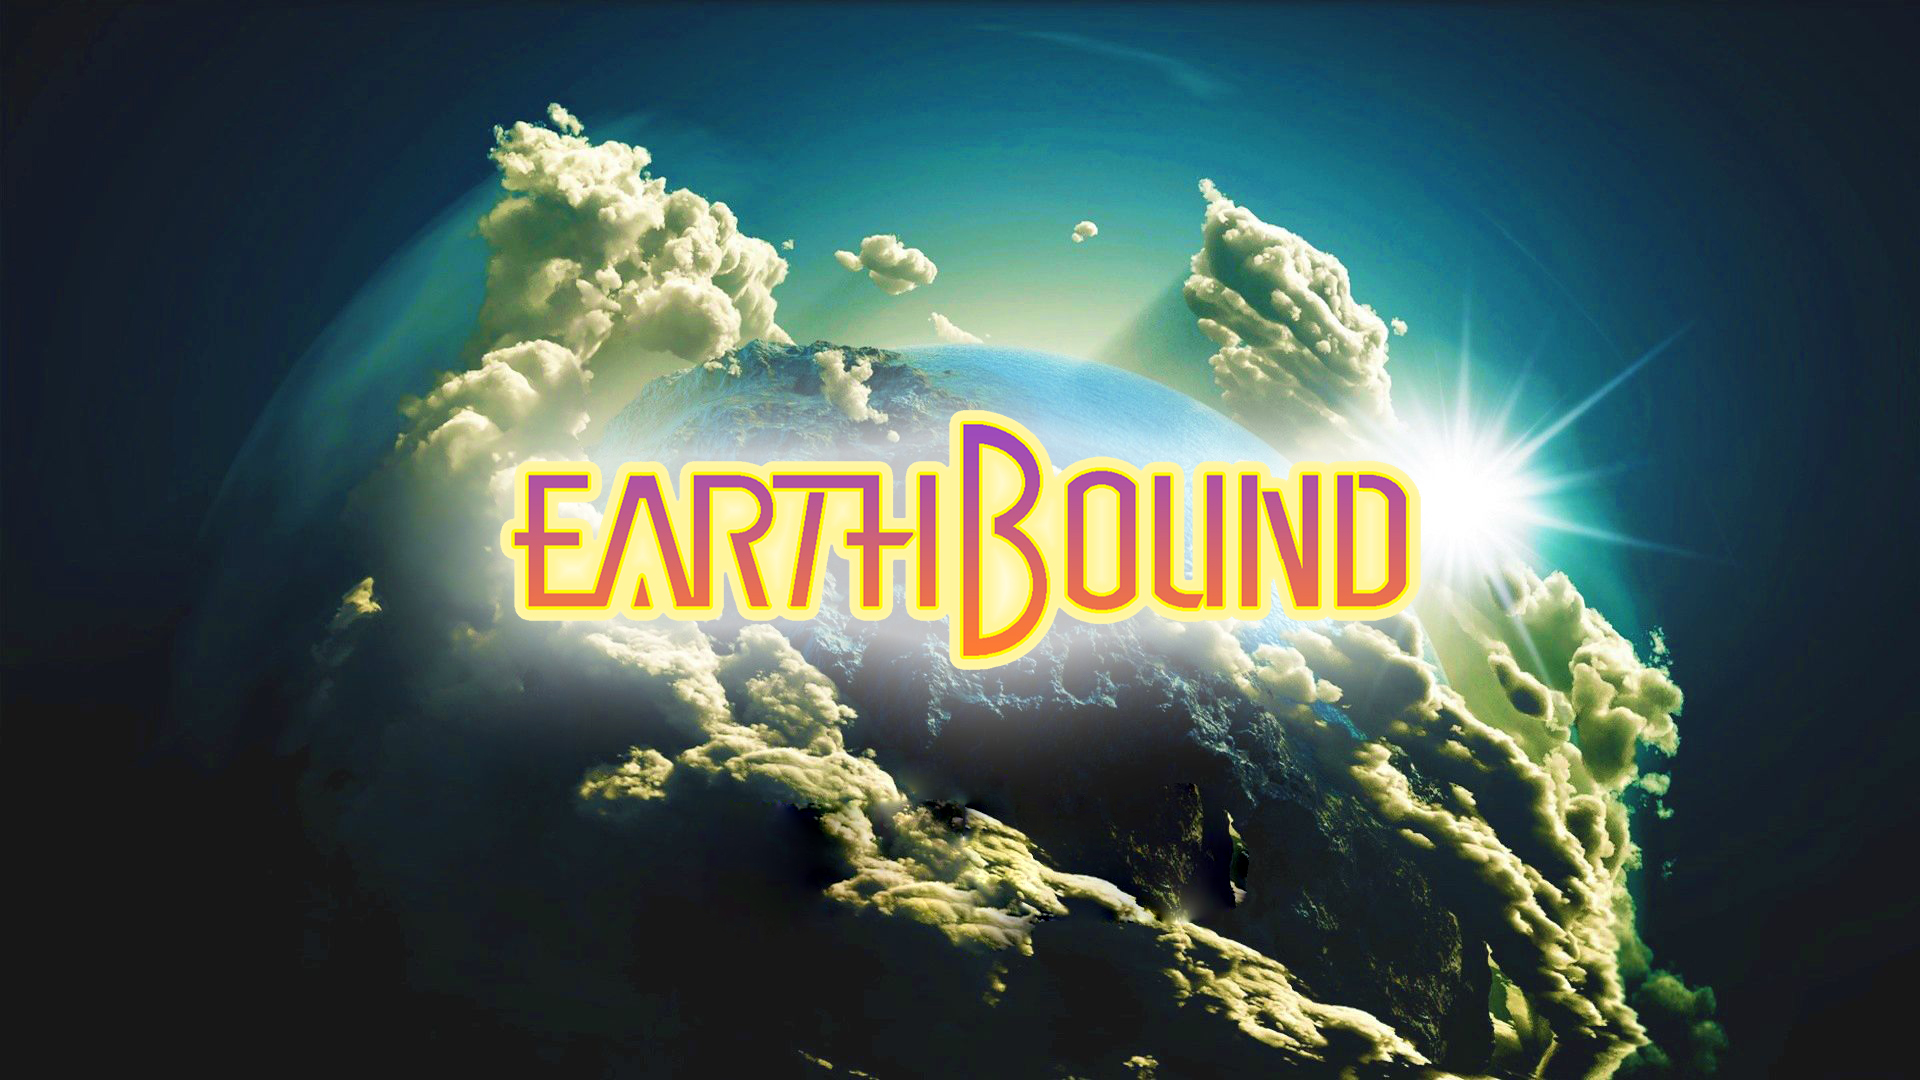 earthbound wallpaper,nature,sky,atmosphere,font,world